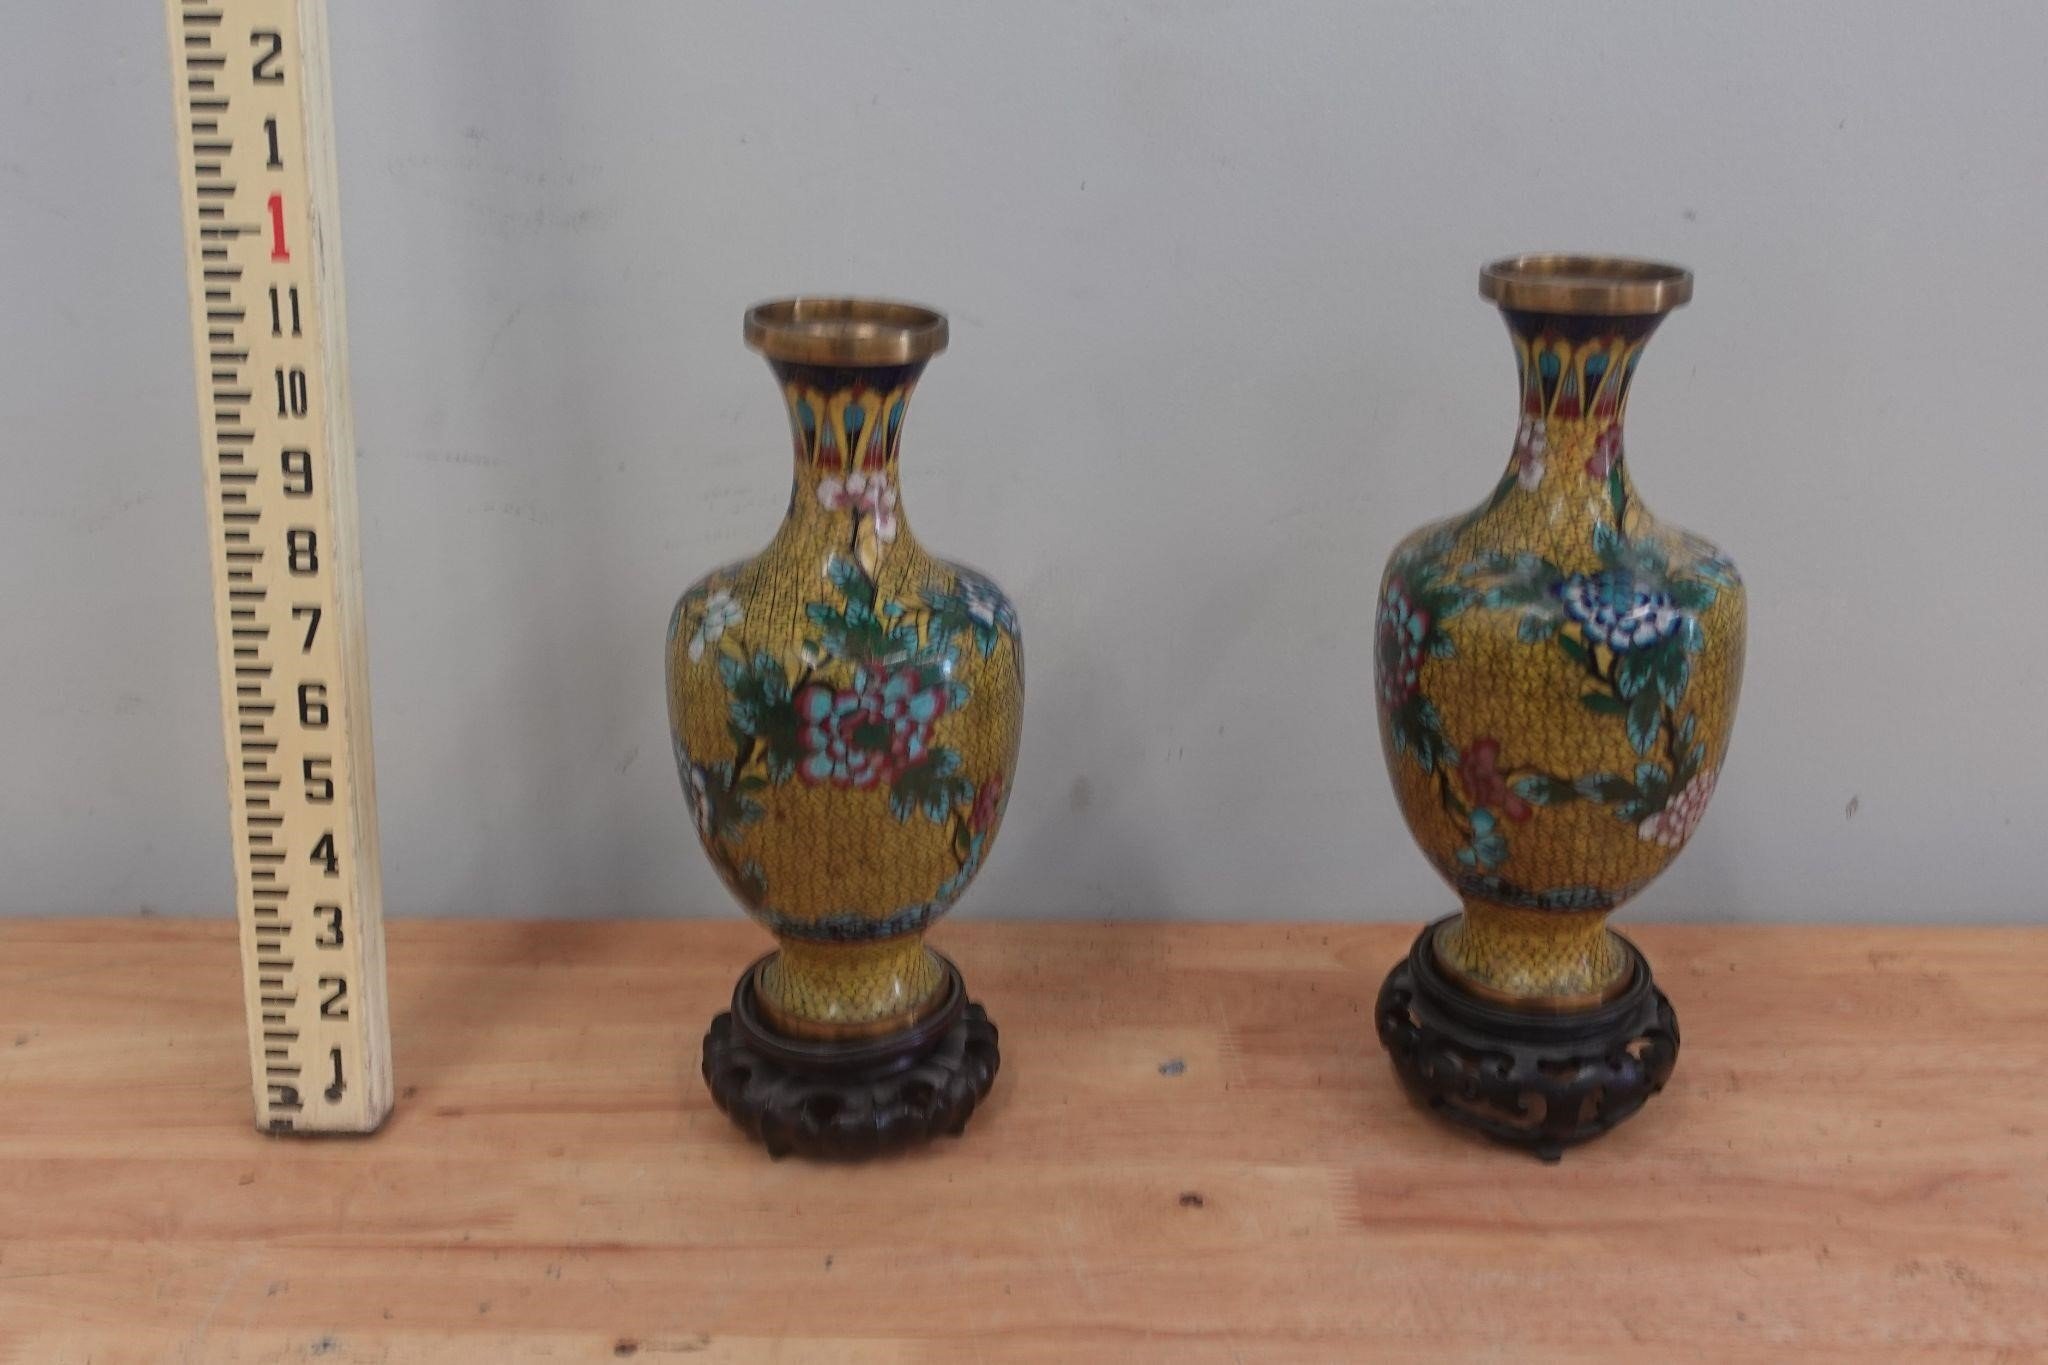 Mother's Day Multi-Estate Auction